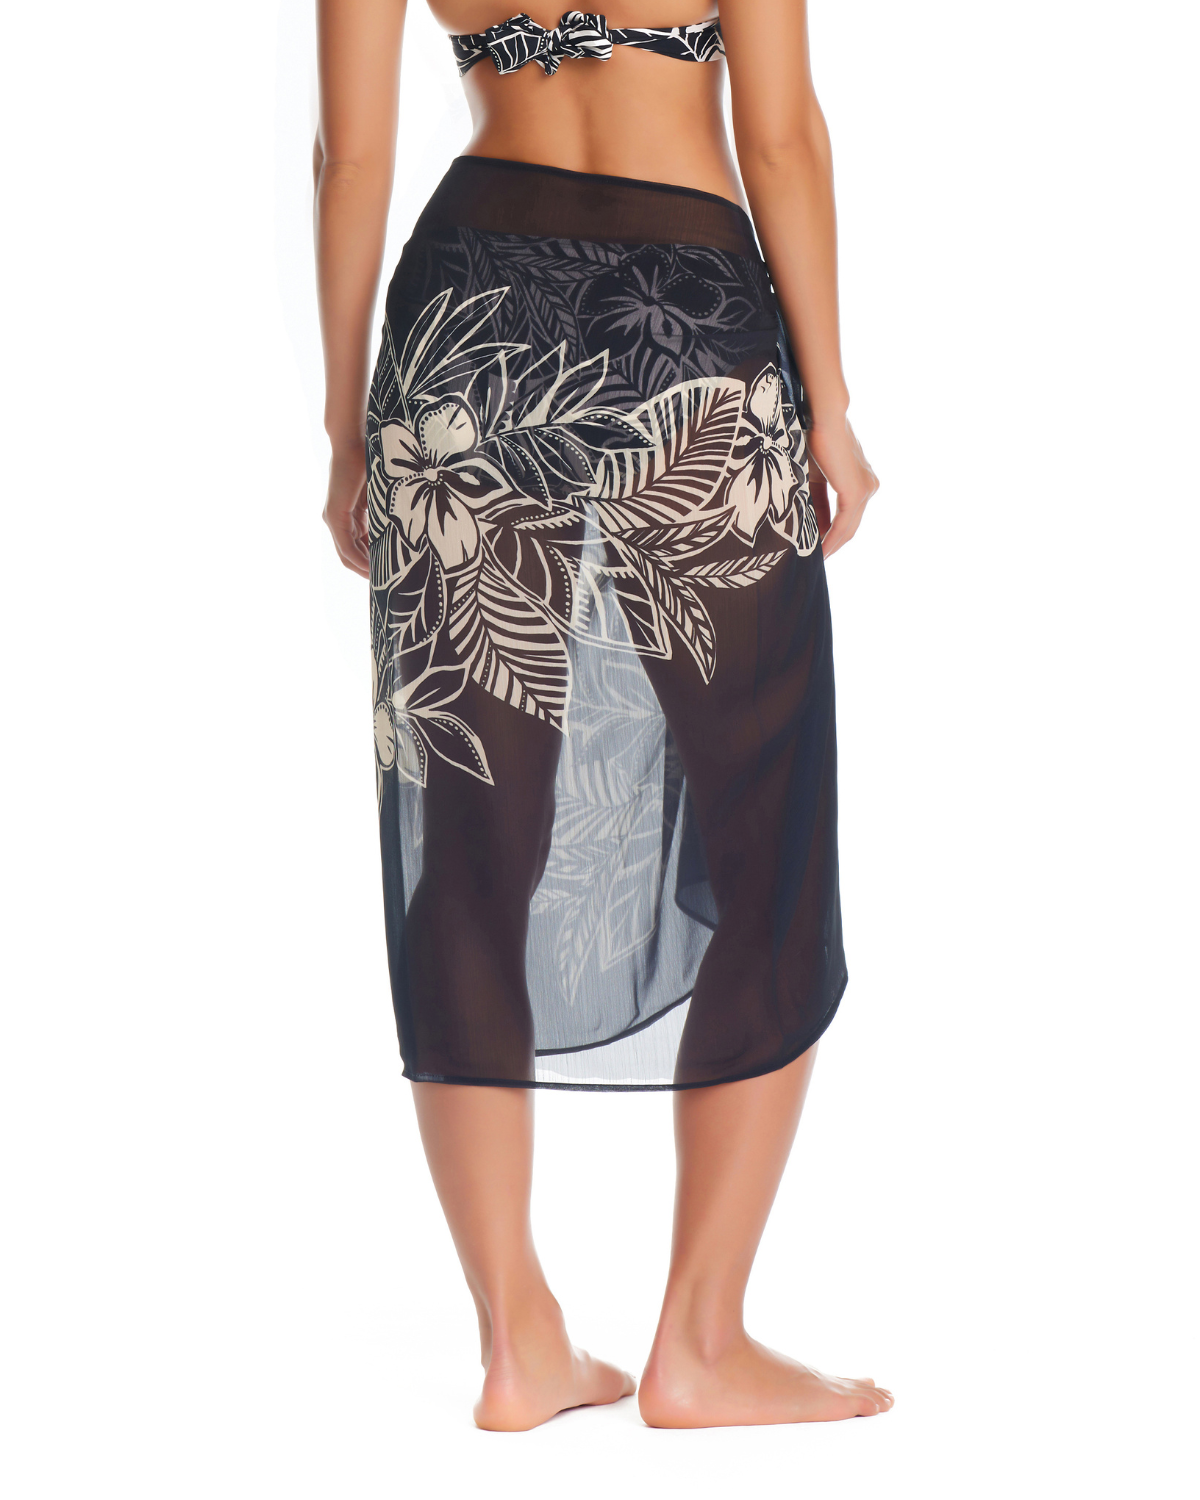 Model wearing a pareo cover up with a black base and white tropical Hawaiian floral detail